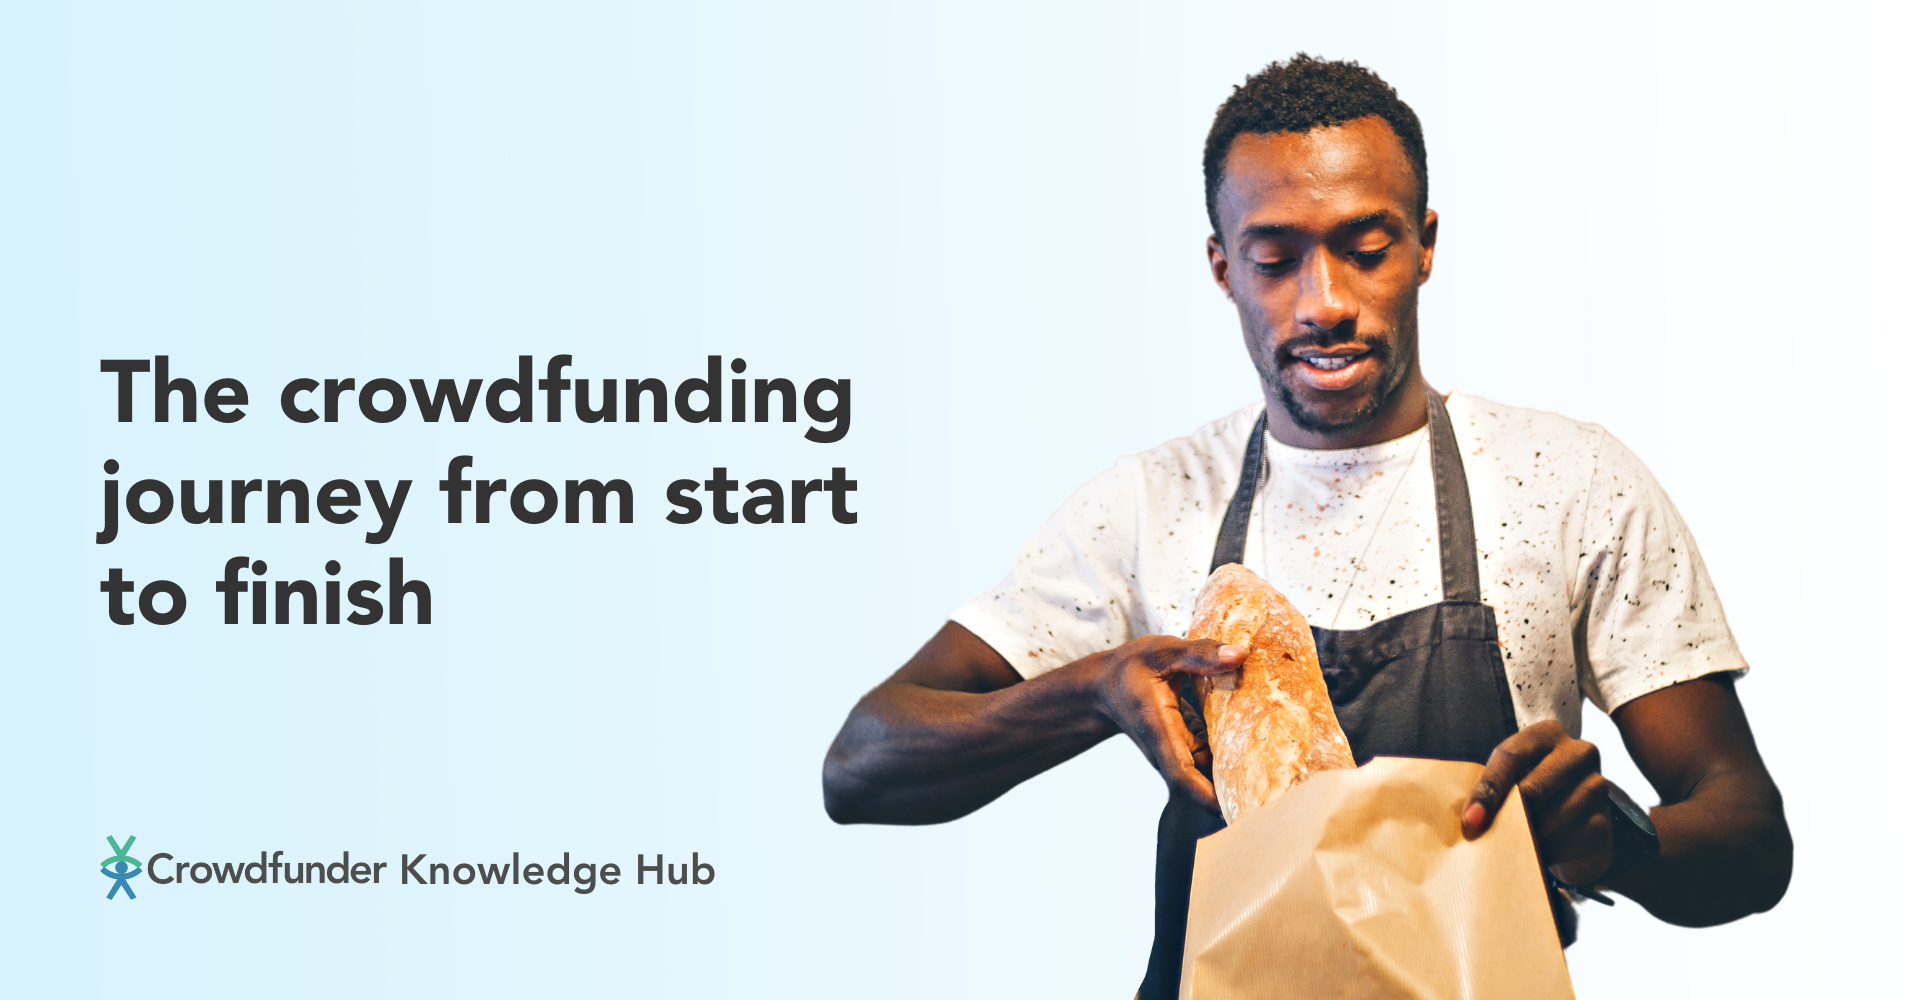 The crowdfunding journey from start to finish